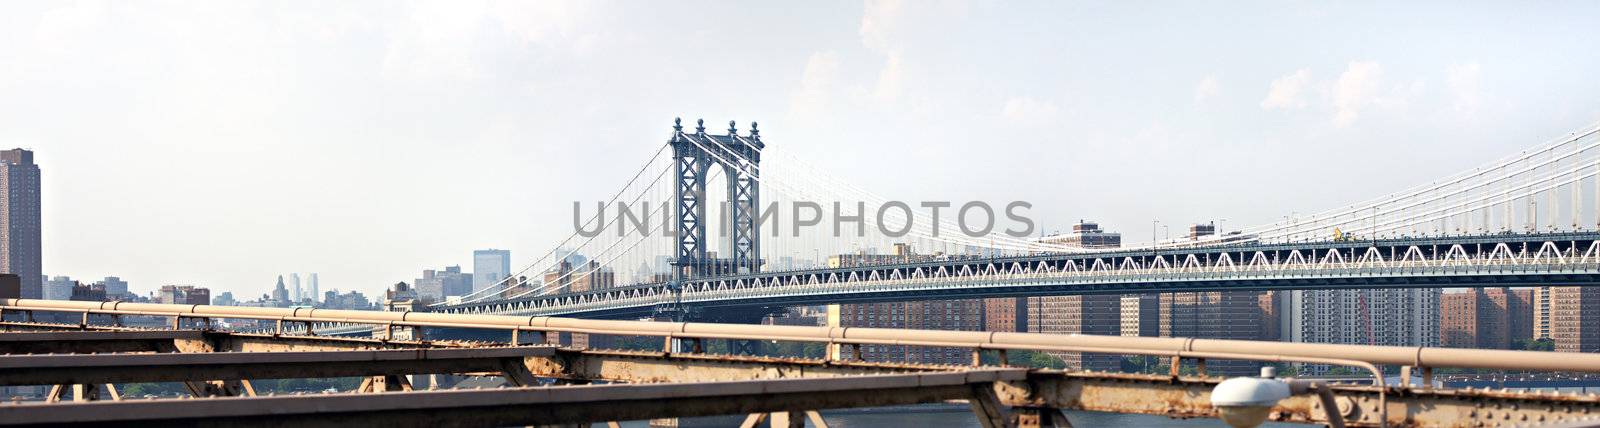 The famous and historic Manhattan Bridge located in New York City.